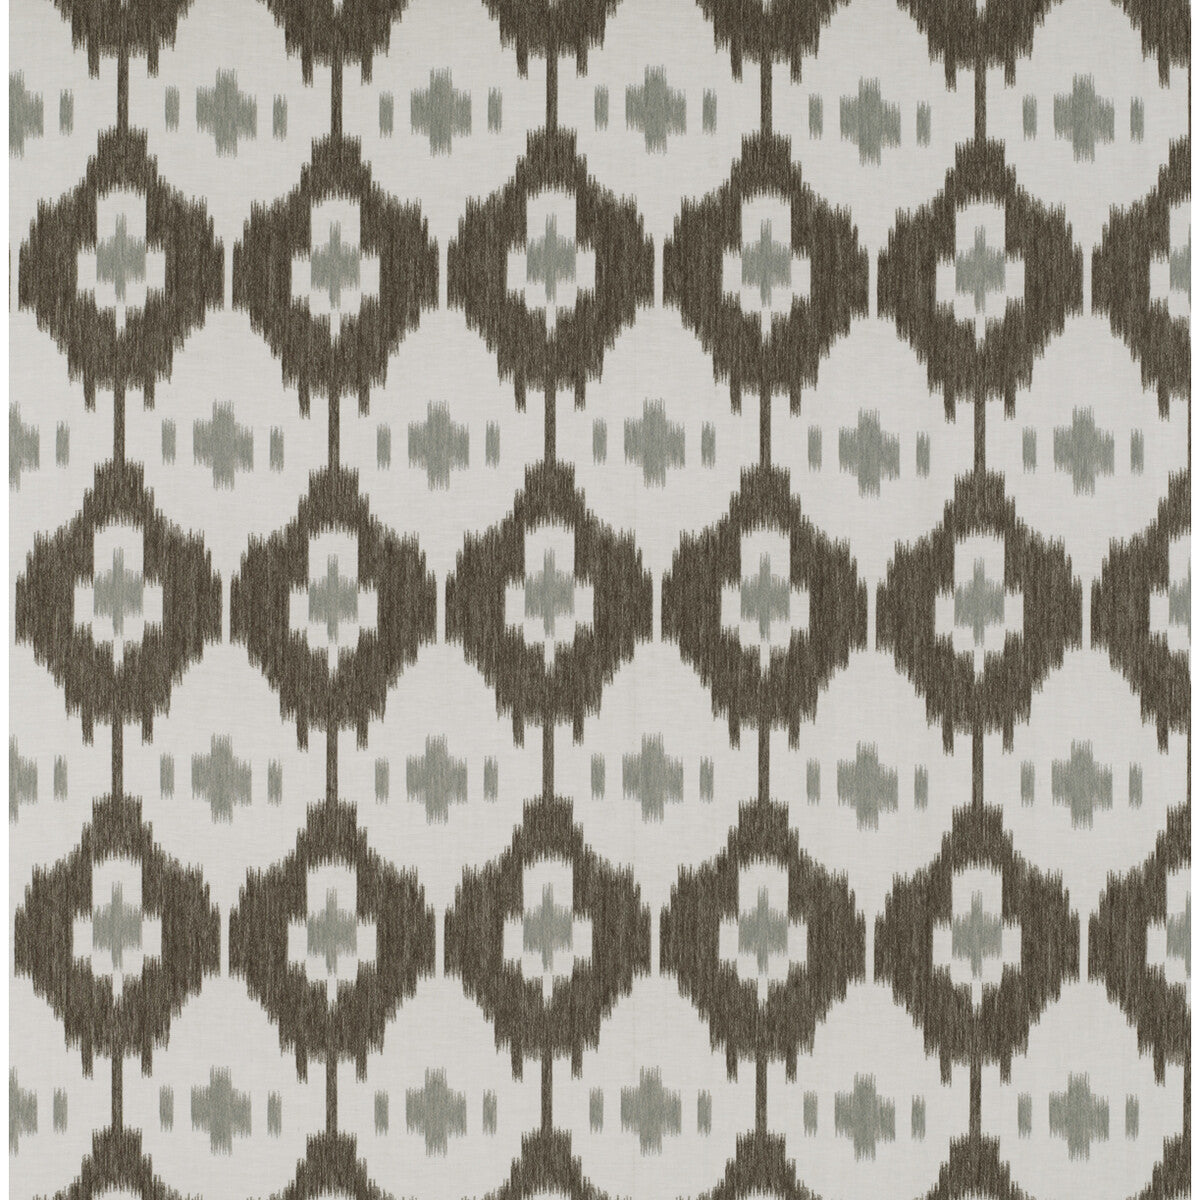 Panarea fabric in chocolate/gris color - pattern GDT5315.007.0 - by Gaston y Daniela in the Tierras collection